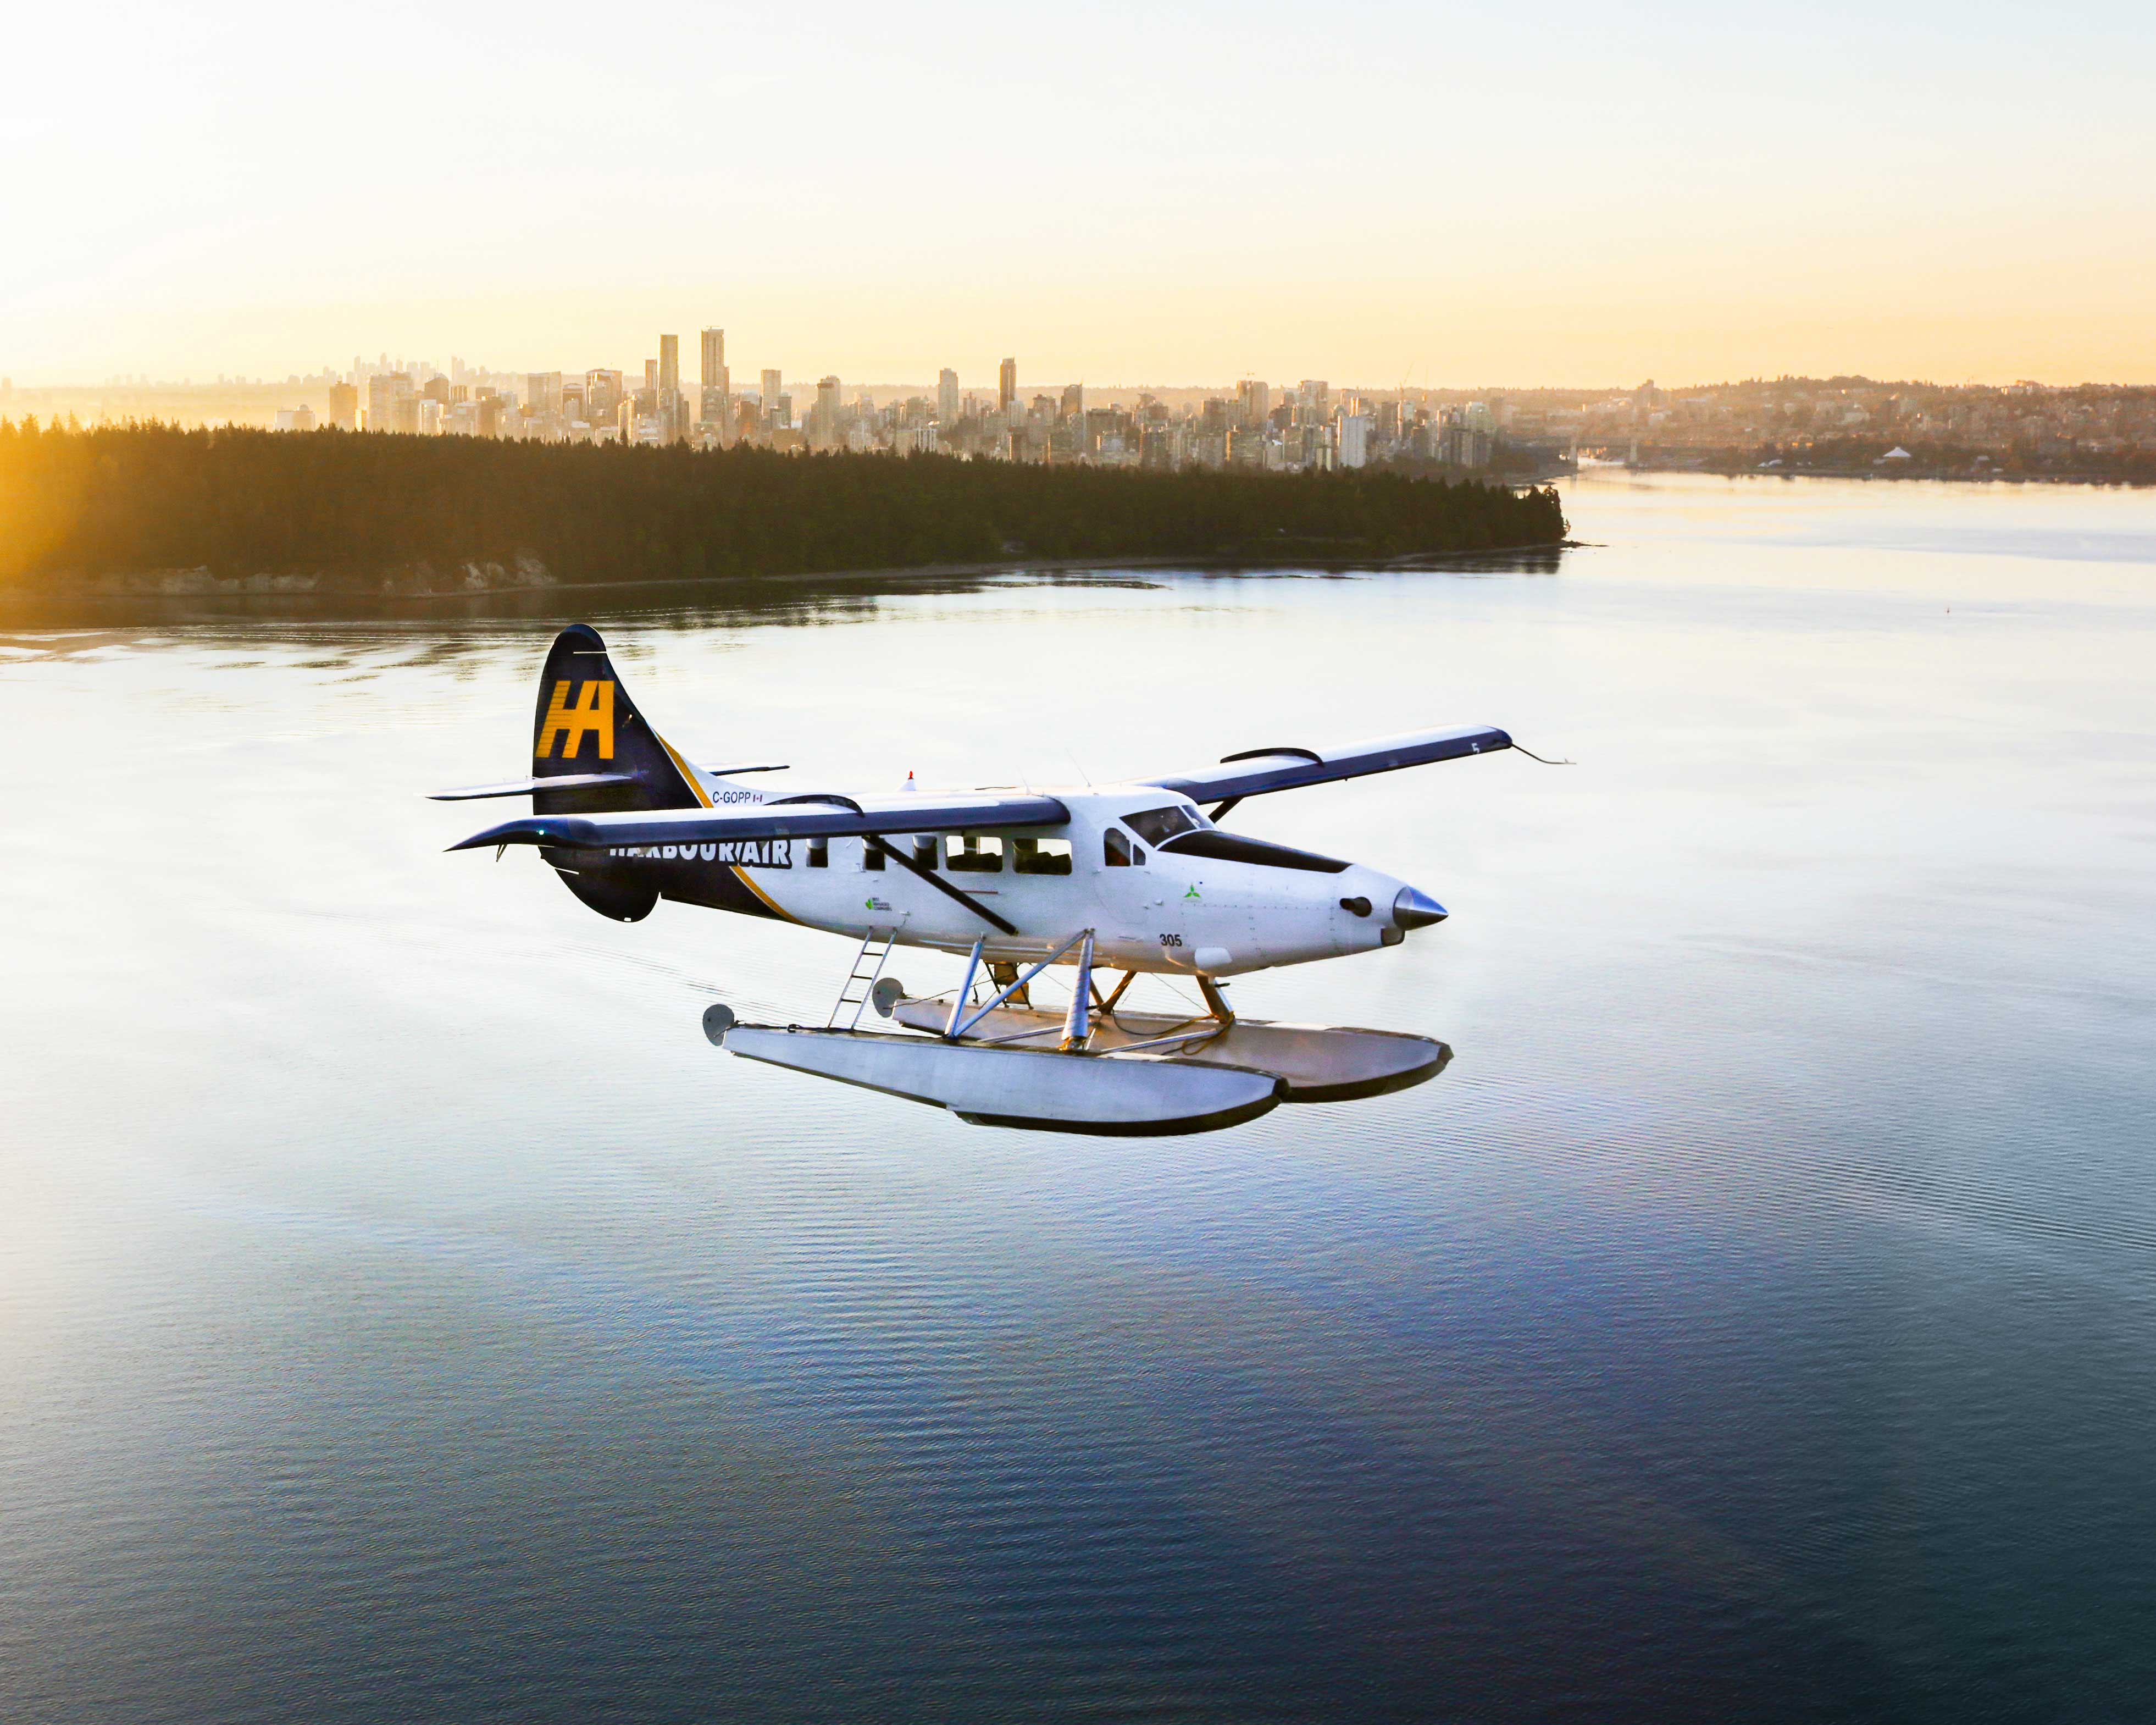 Vancouver vacations: a seaplane soaring away from Vancouver at sundown.